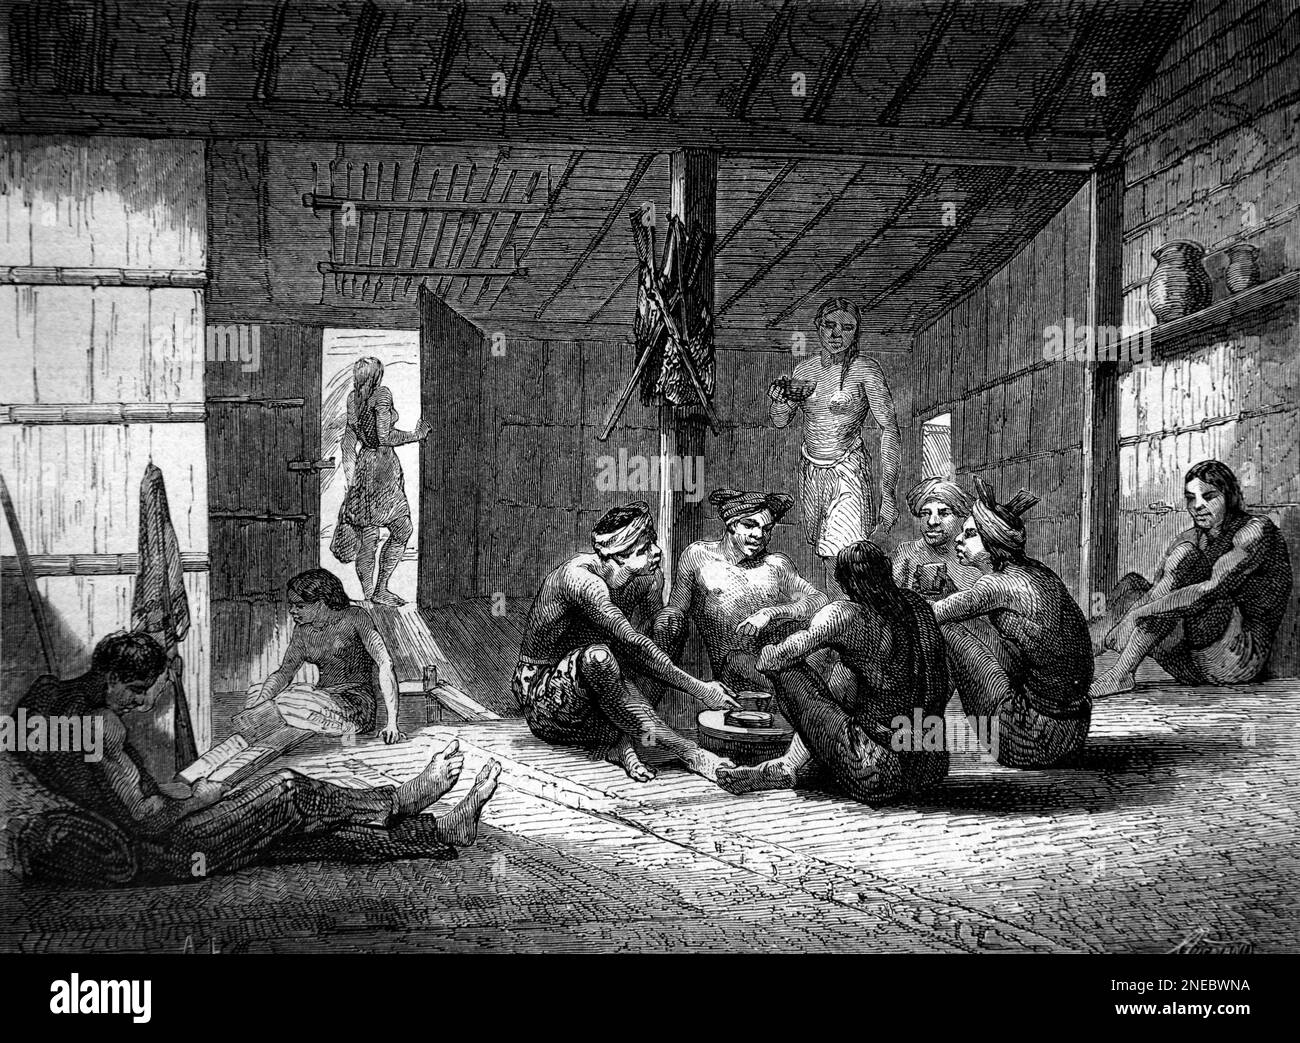 Dayak Ceremony, Communal Meal and Daily Life Inside a Dayak Longhouse Borneo. Vintage Engraving or Illustration 1862 Stock Photo